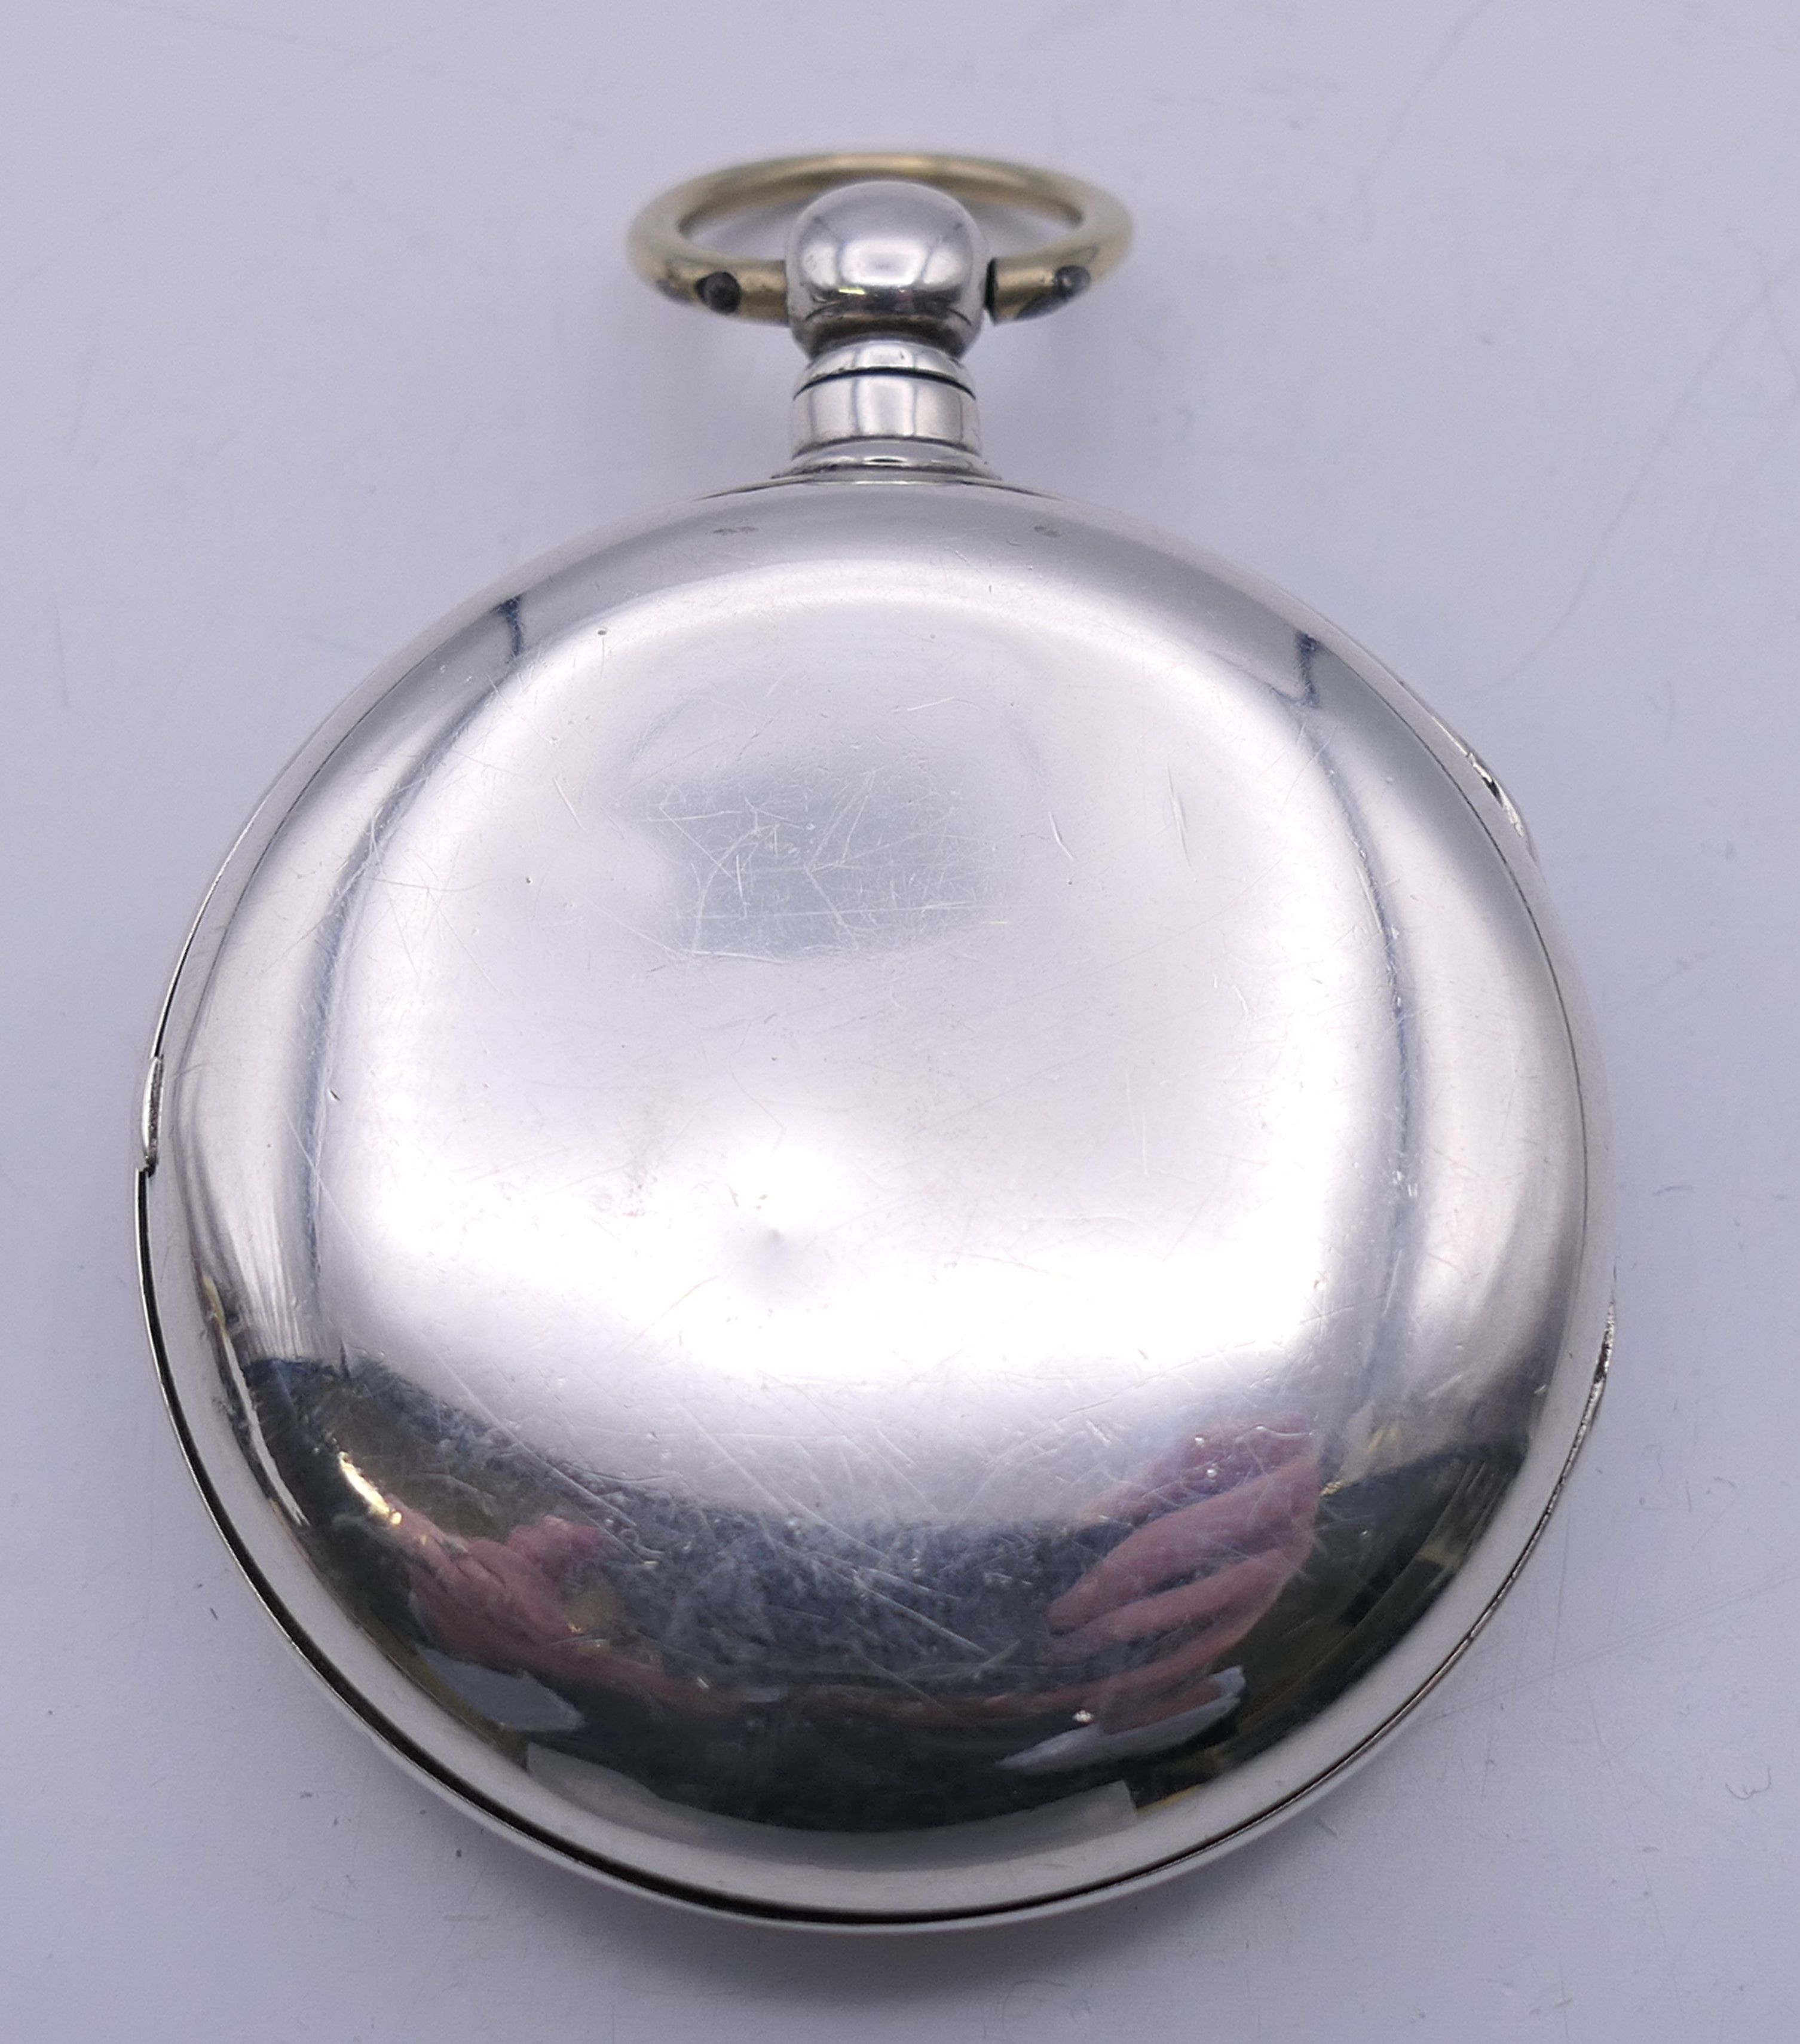 An H Samuel silver pair cased pocket watch, hallmarked for Chester 1887, serial number 67779. - Image 3 of 10